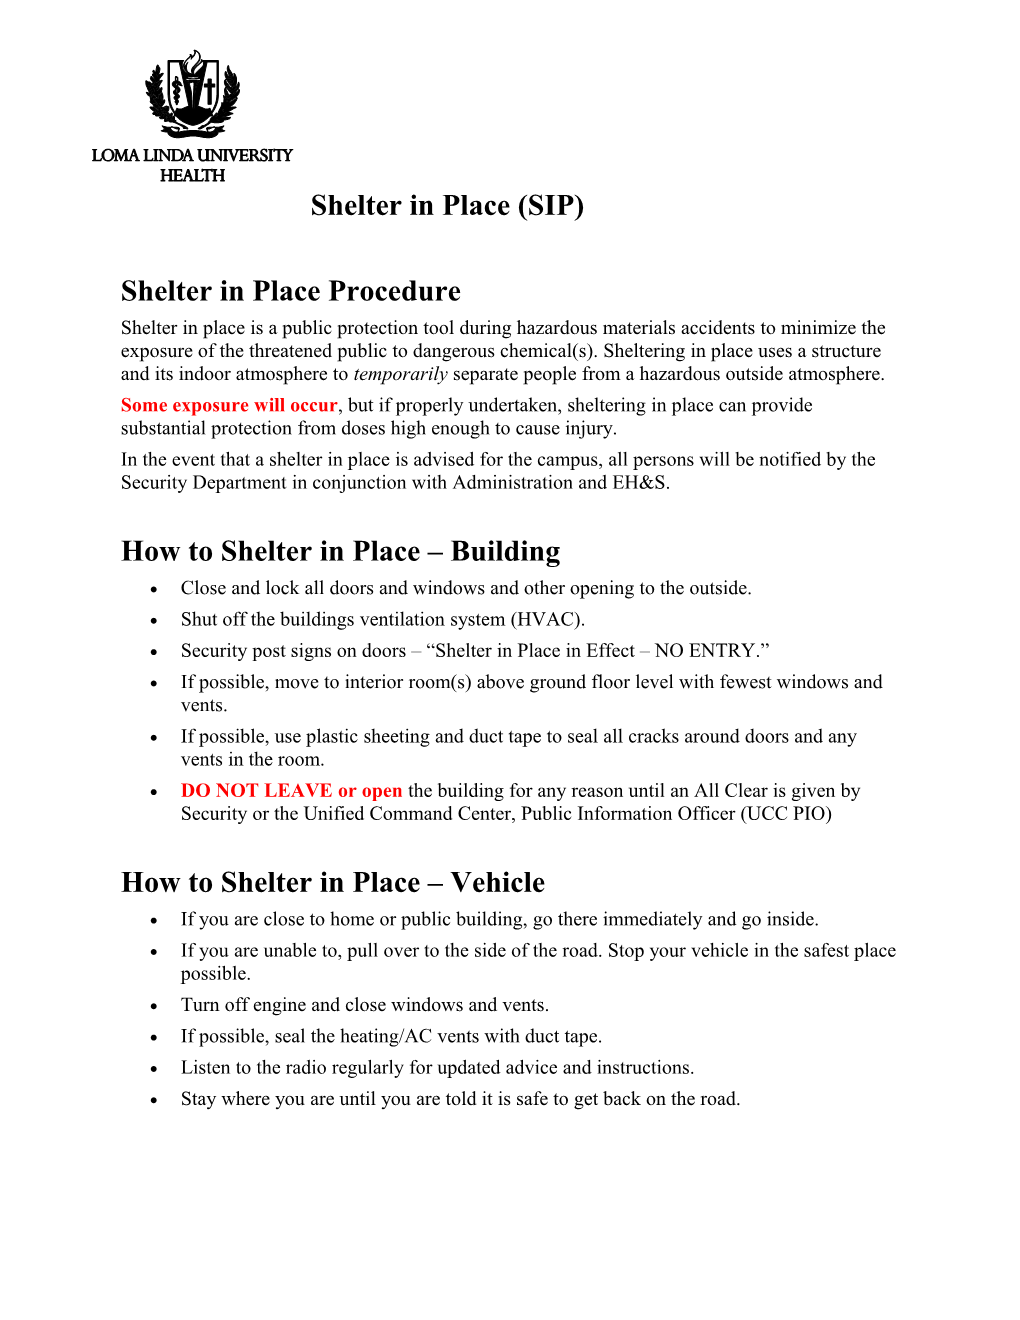 Shelter in Place Procedure